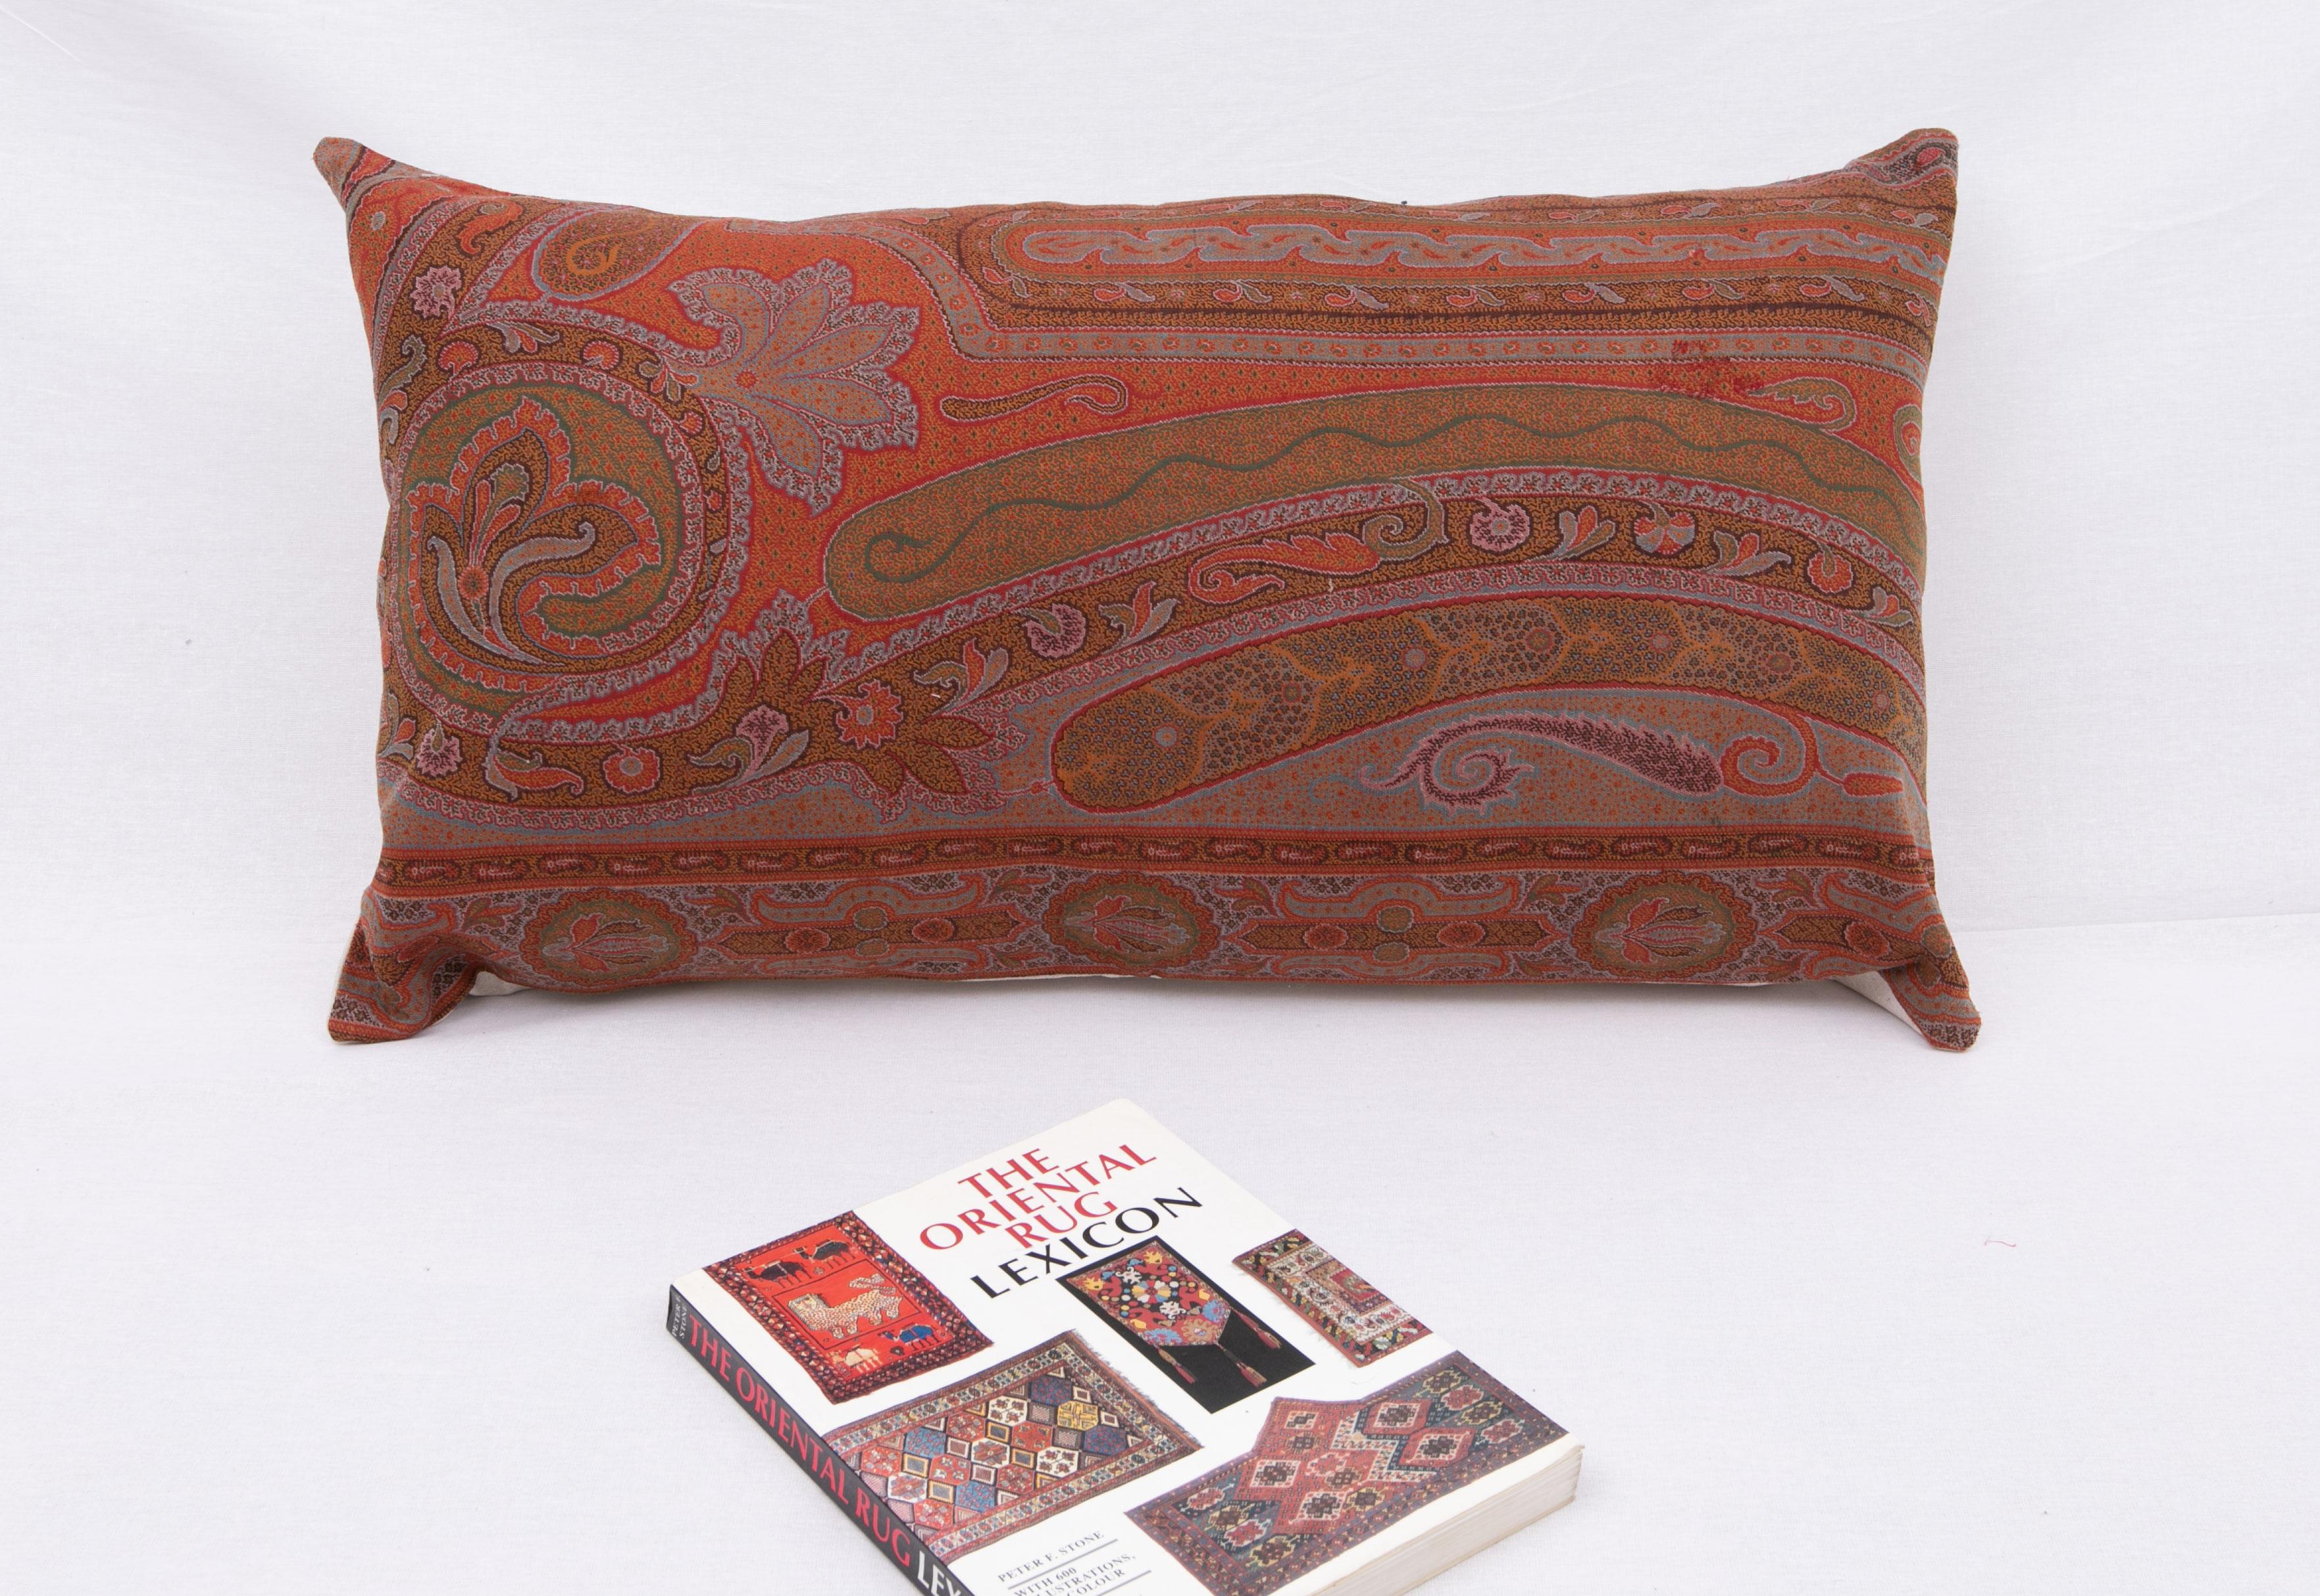 Antique Paisley pillow cover made from a European Wool Paisley Shawl, late 19th / early 20th century.
It does not come with an insert.
Linen in the back.
Zipper closure.
Dry. Cleaning is reccommeded.

Antique European Paisley shawls are a type